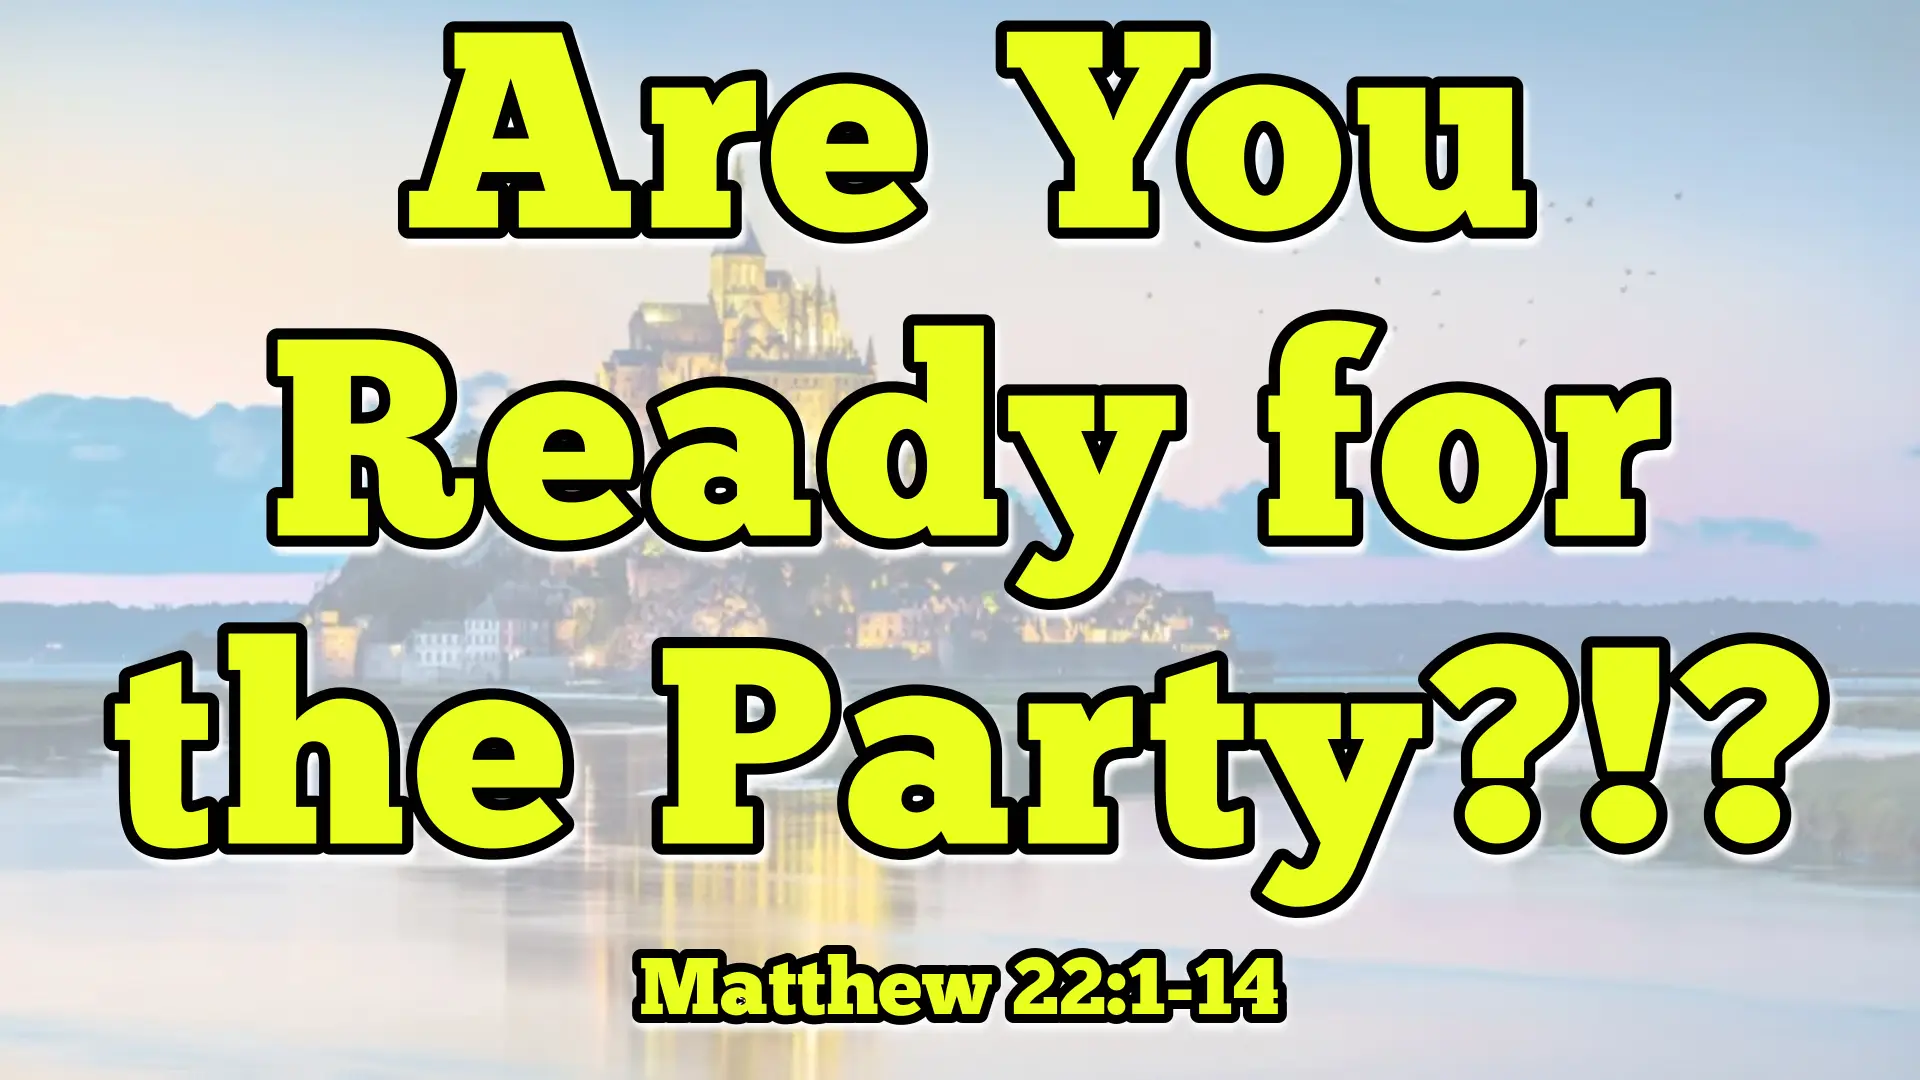 Are You Ready for the Party?!? - Matthew 22:1-14